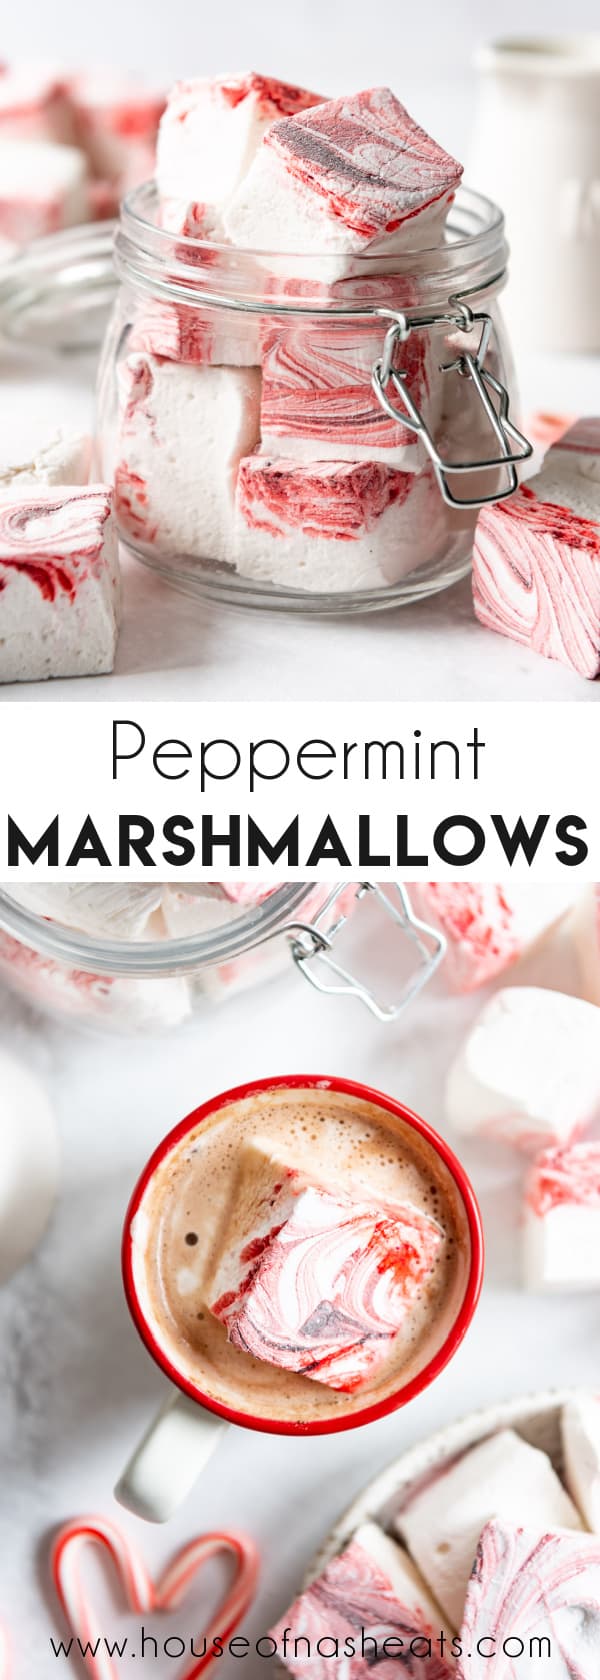 A collage of images of homemade peppermint marshmallows with text overlay.